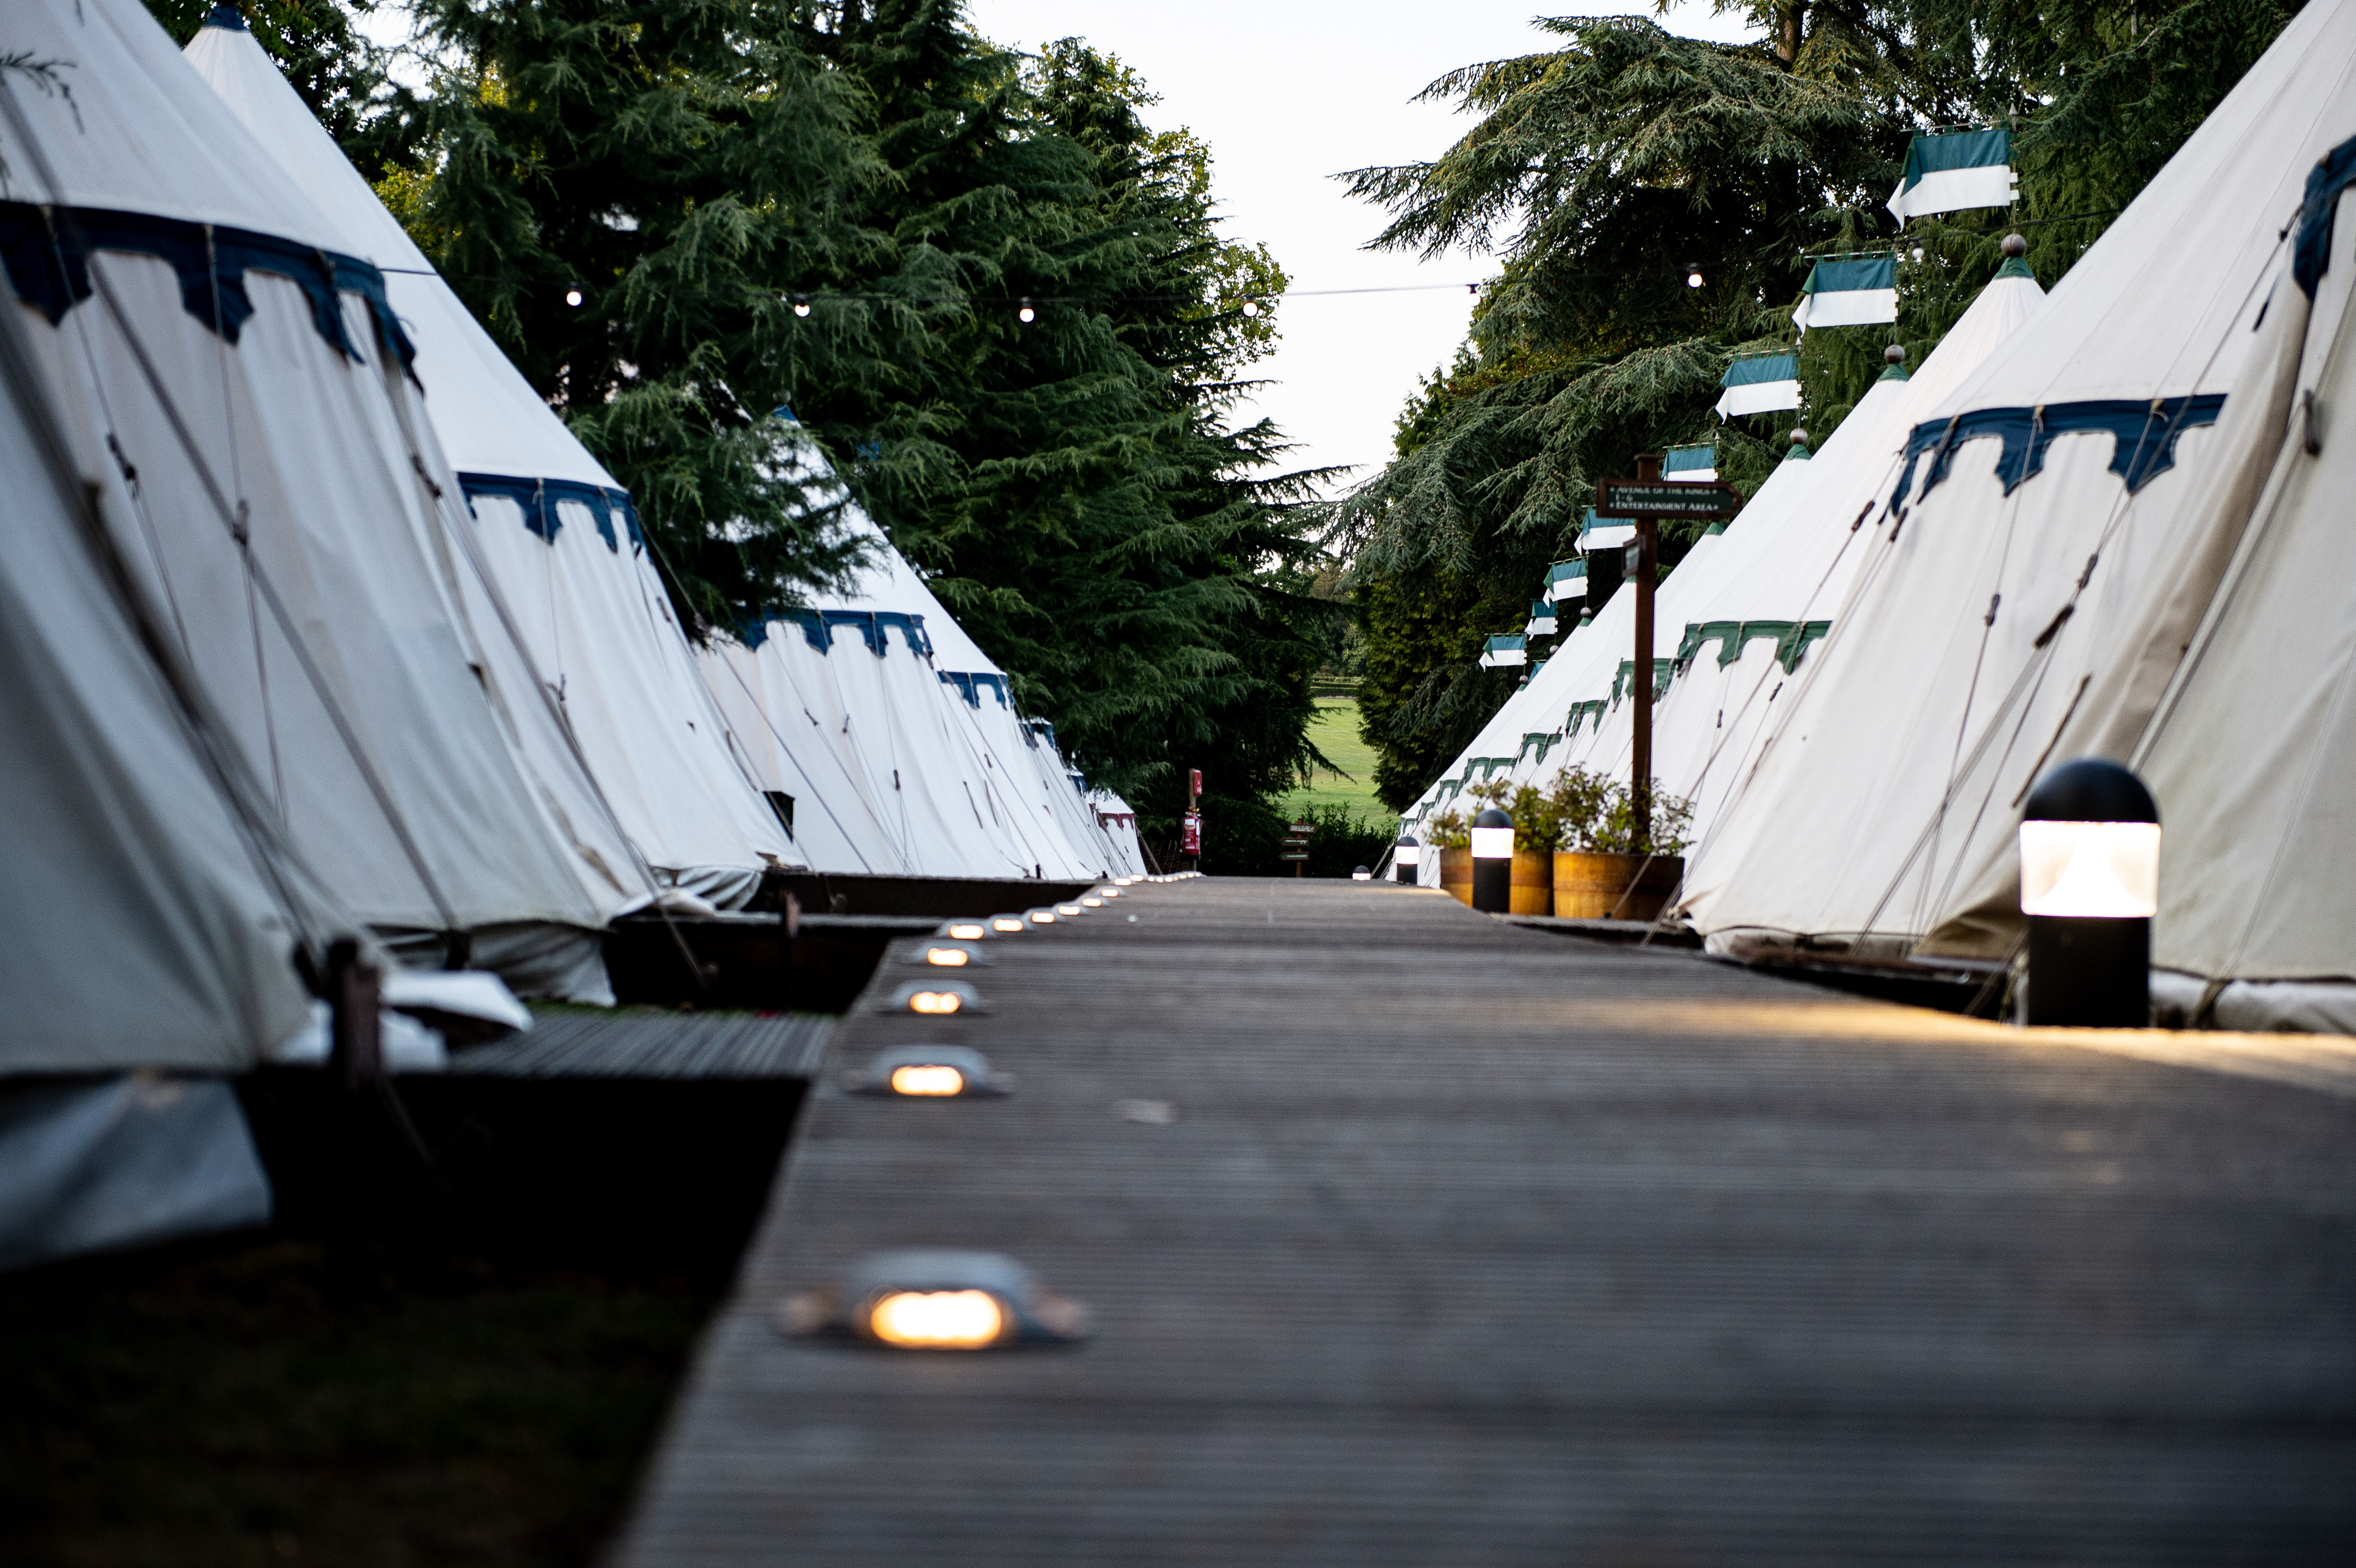 Glamping tents in a line